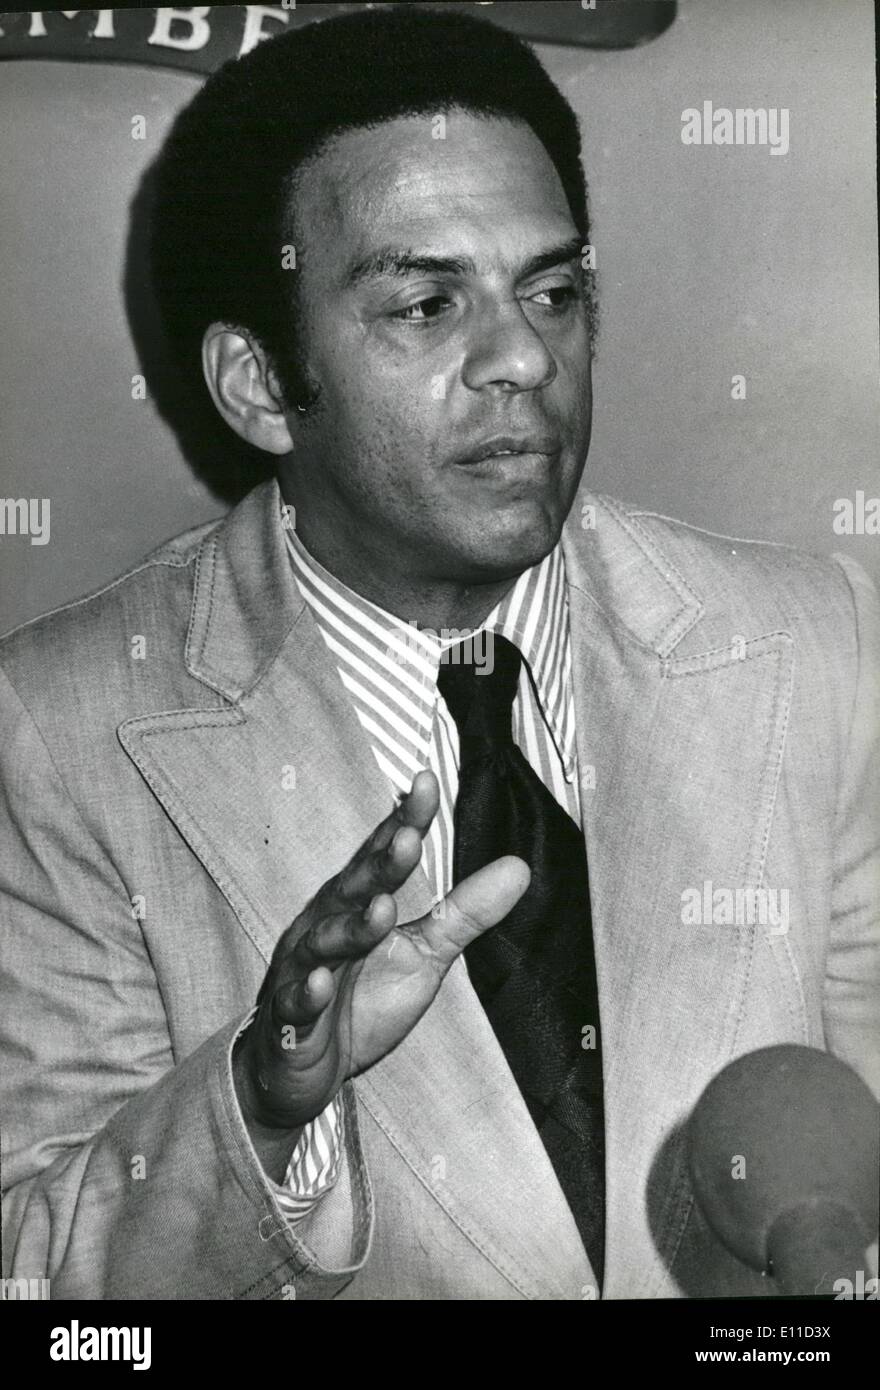 Feb. 02, 1977 - Mr. Andrew Young, the united states ambassador to the UN pictured here in Kenya during his trip in Feb 1977. Stock Photo